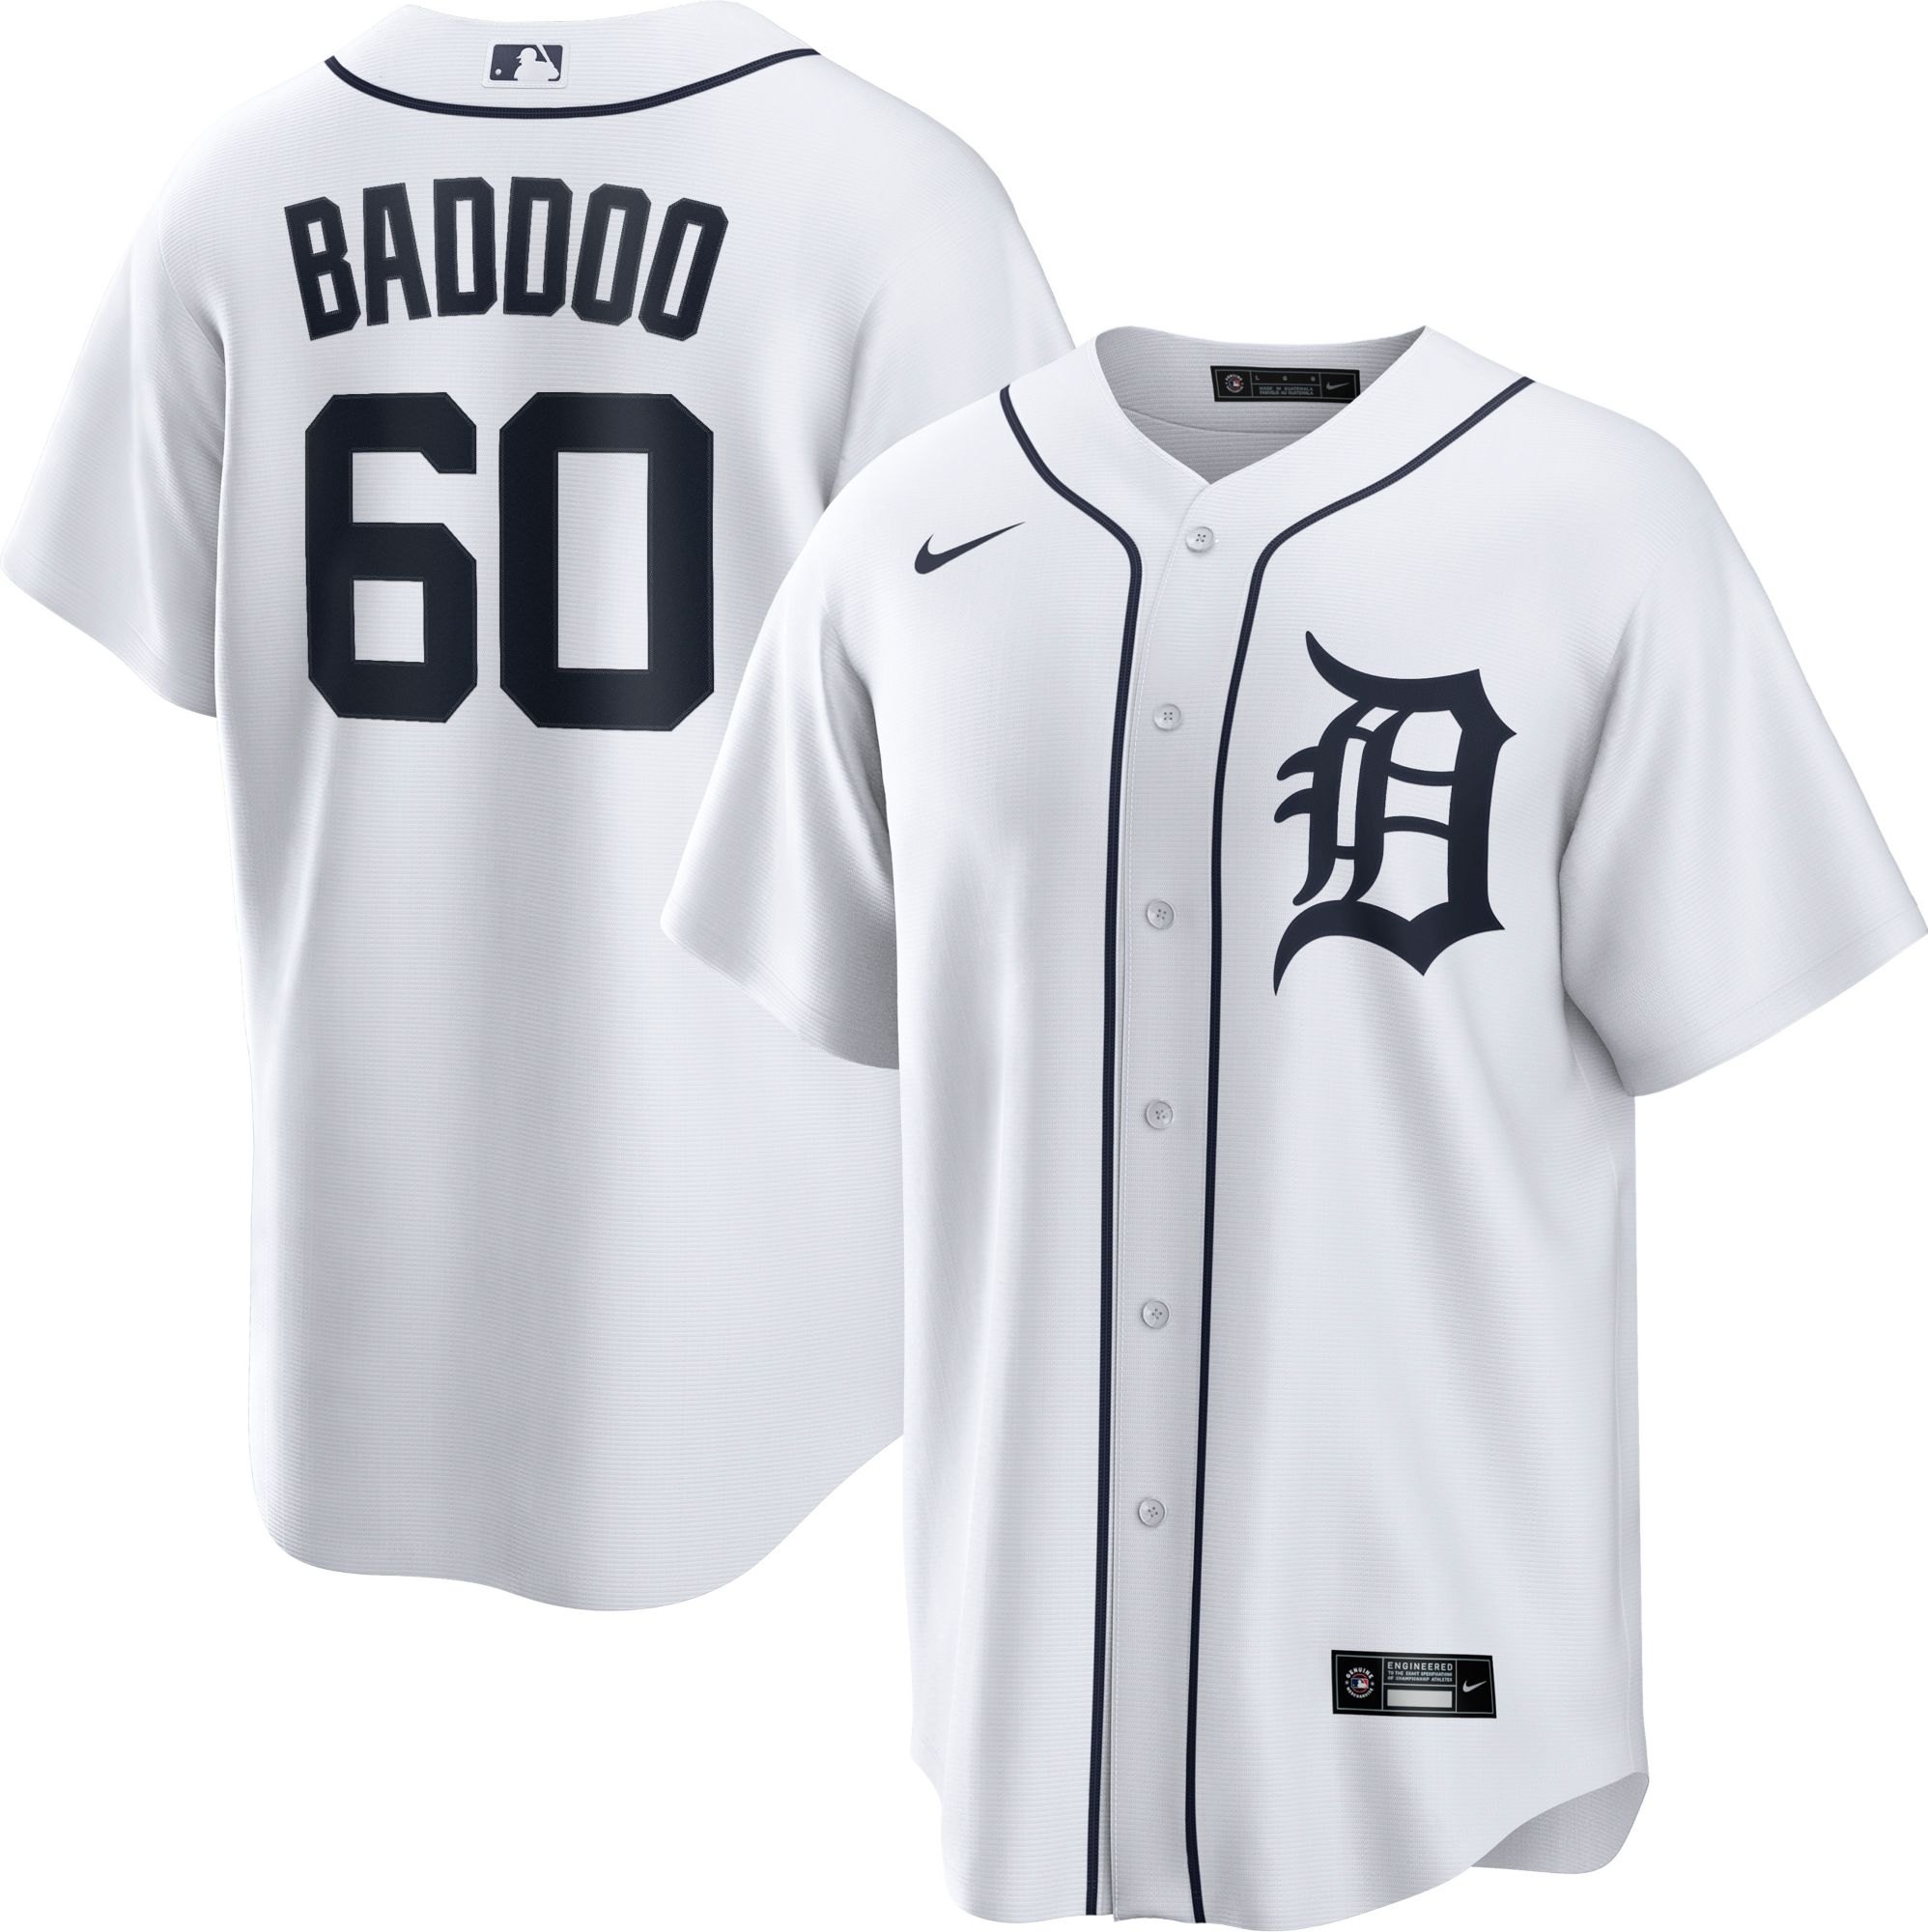 Detroit Tigers #24 Miguel Cabrera Cool Base Men's Stitched Jersey